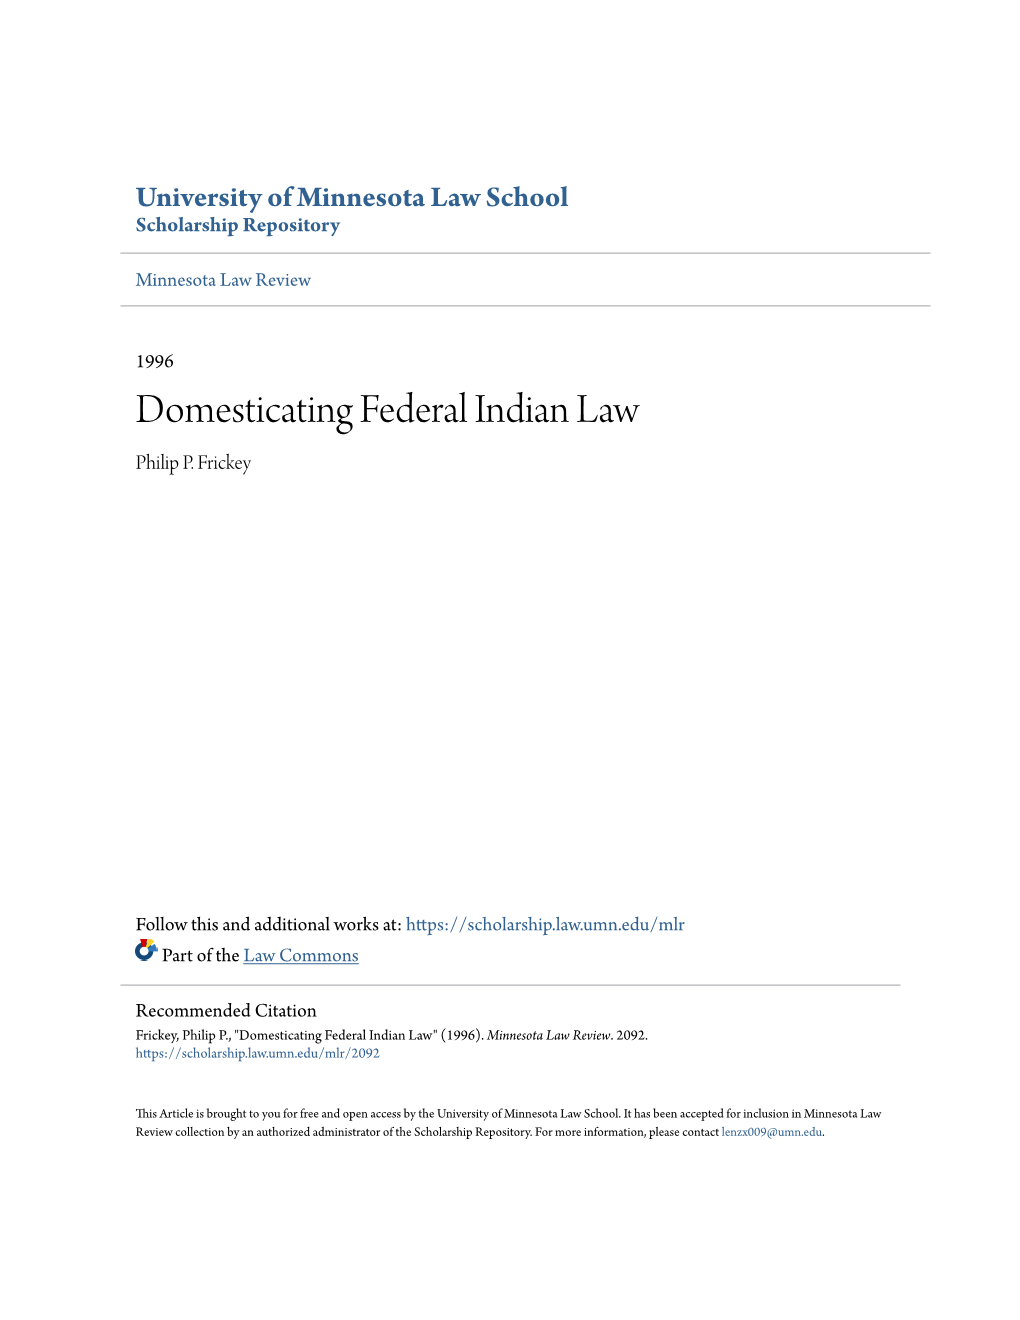 Domesticating Federal Indian Law Philip P